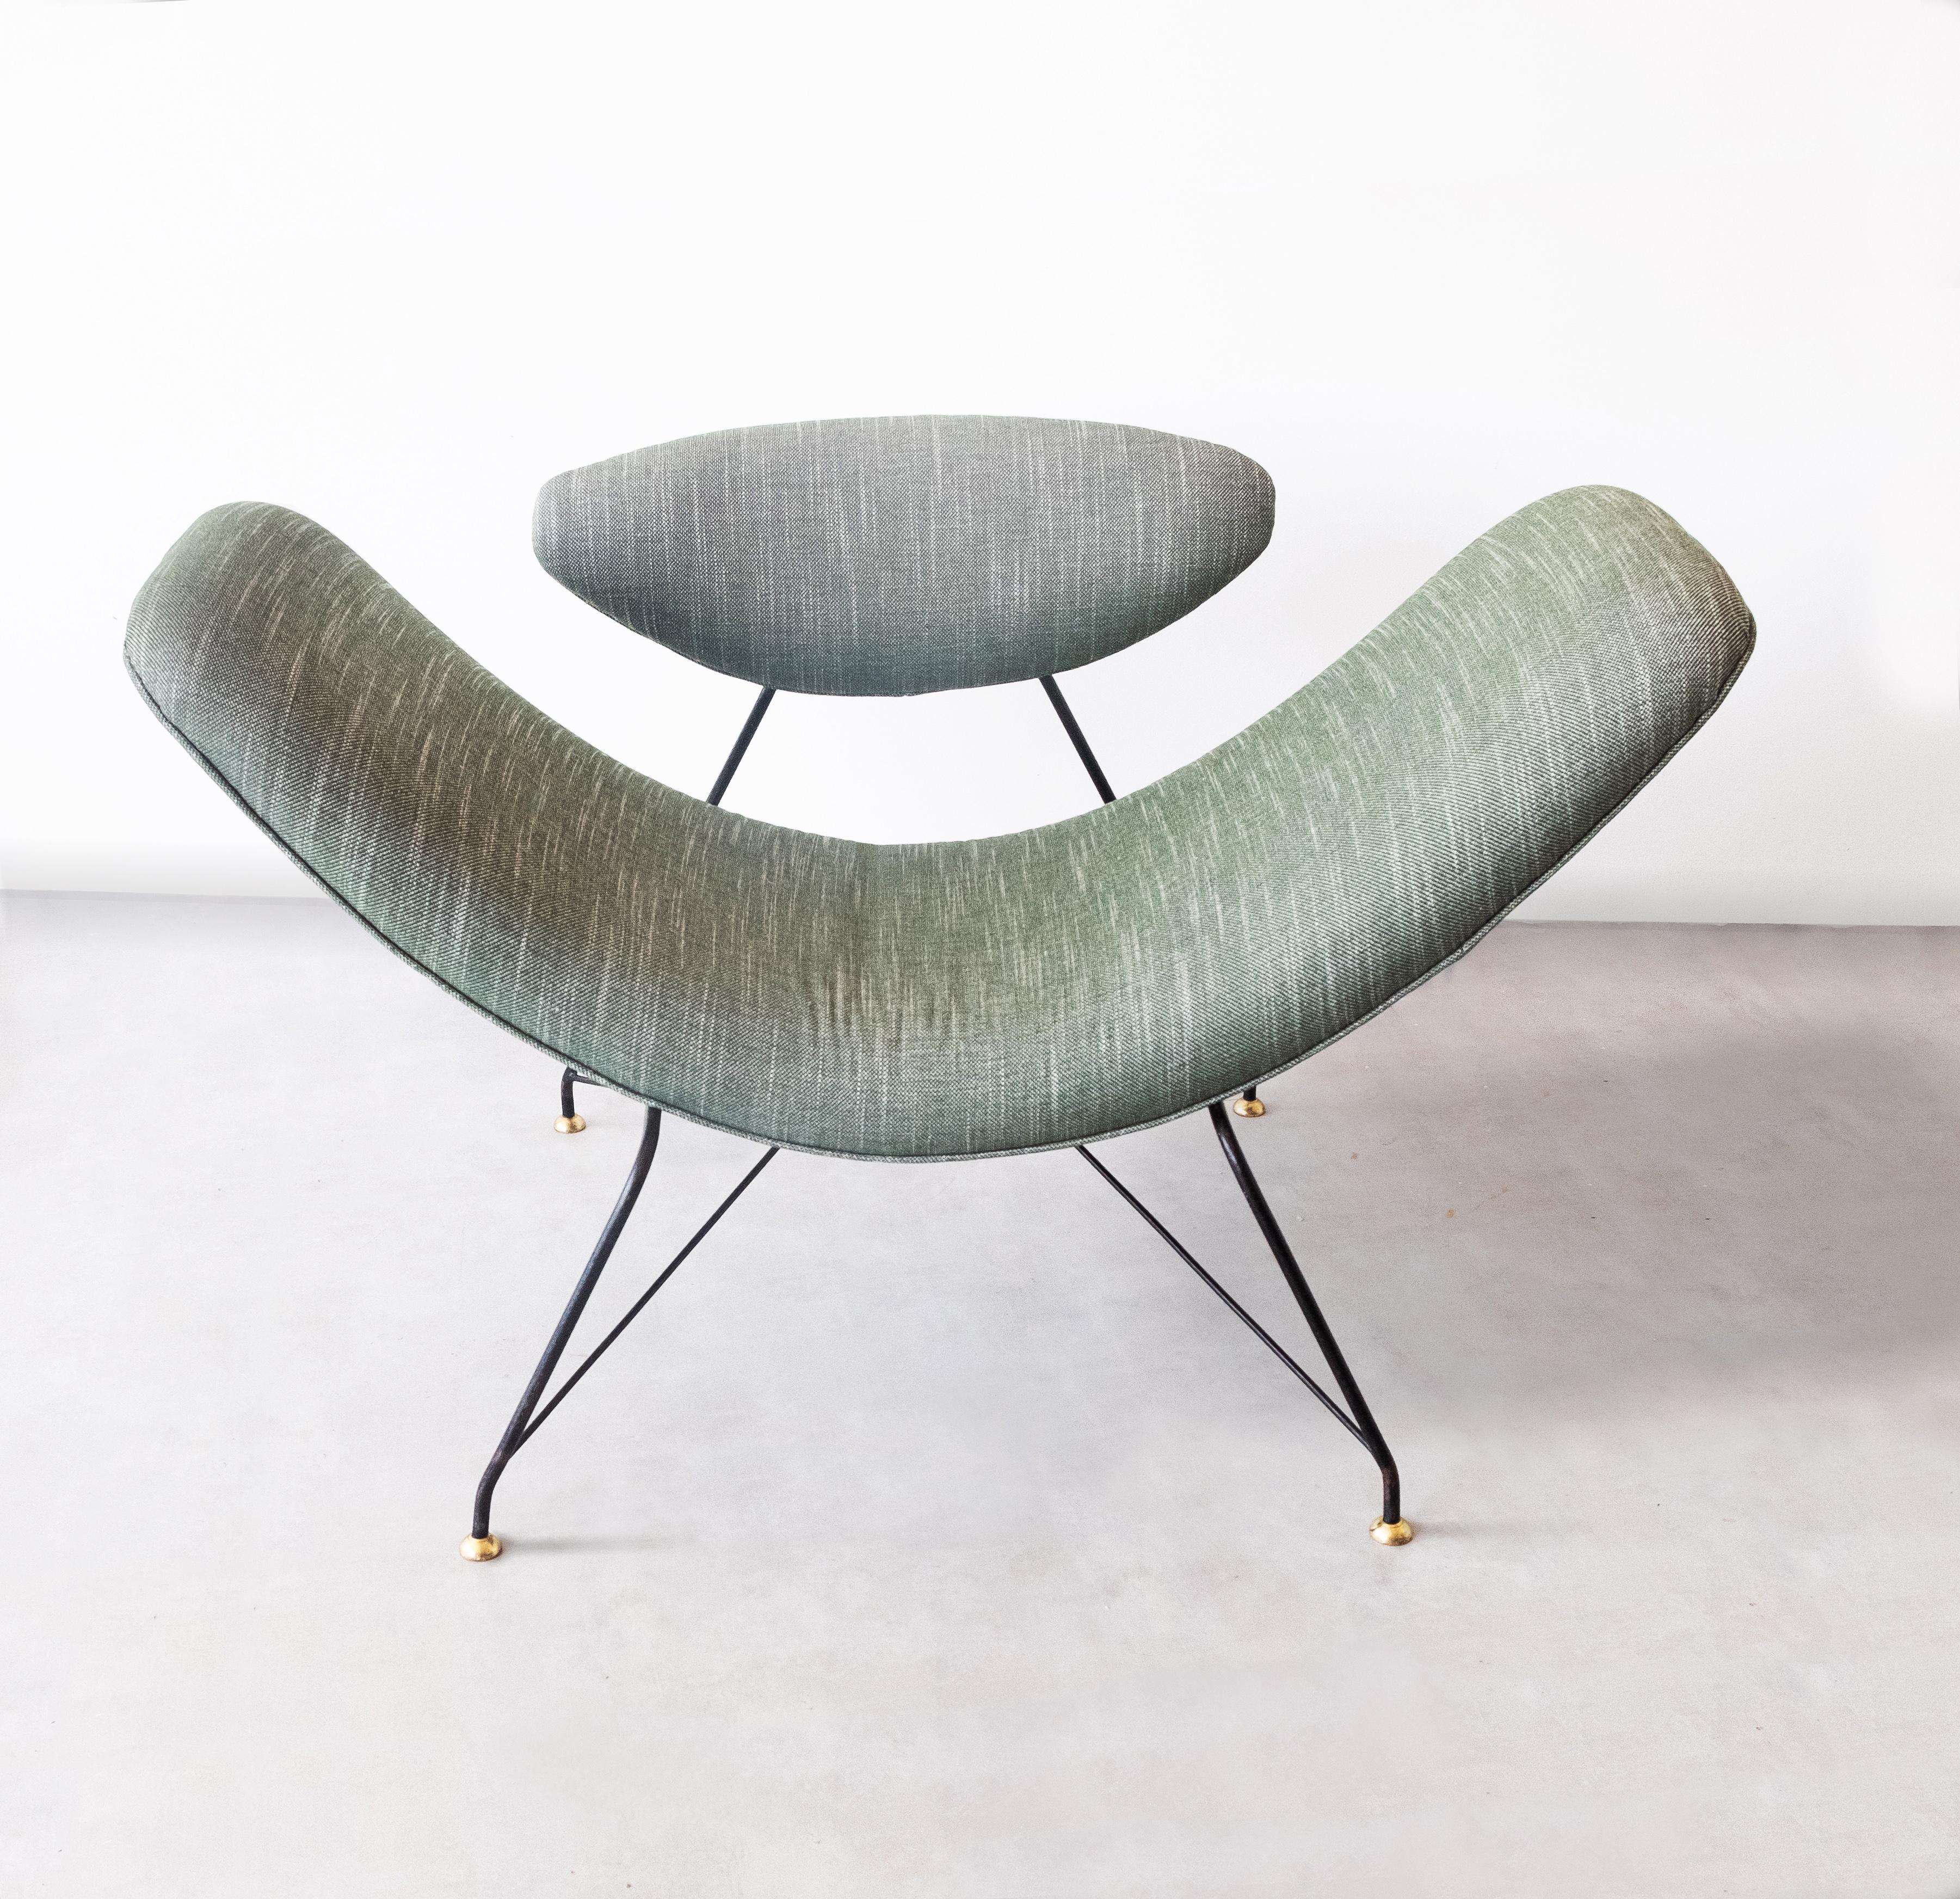 The Reversible is one of the most iconic armchairs in Brazilian Modern Design, and it is today a wonderful example of the awesome creations by the prolific duo Eisler & Hauner and their company Forma. Martin Eisler designed this sculptural chair in